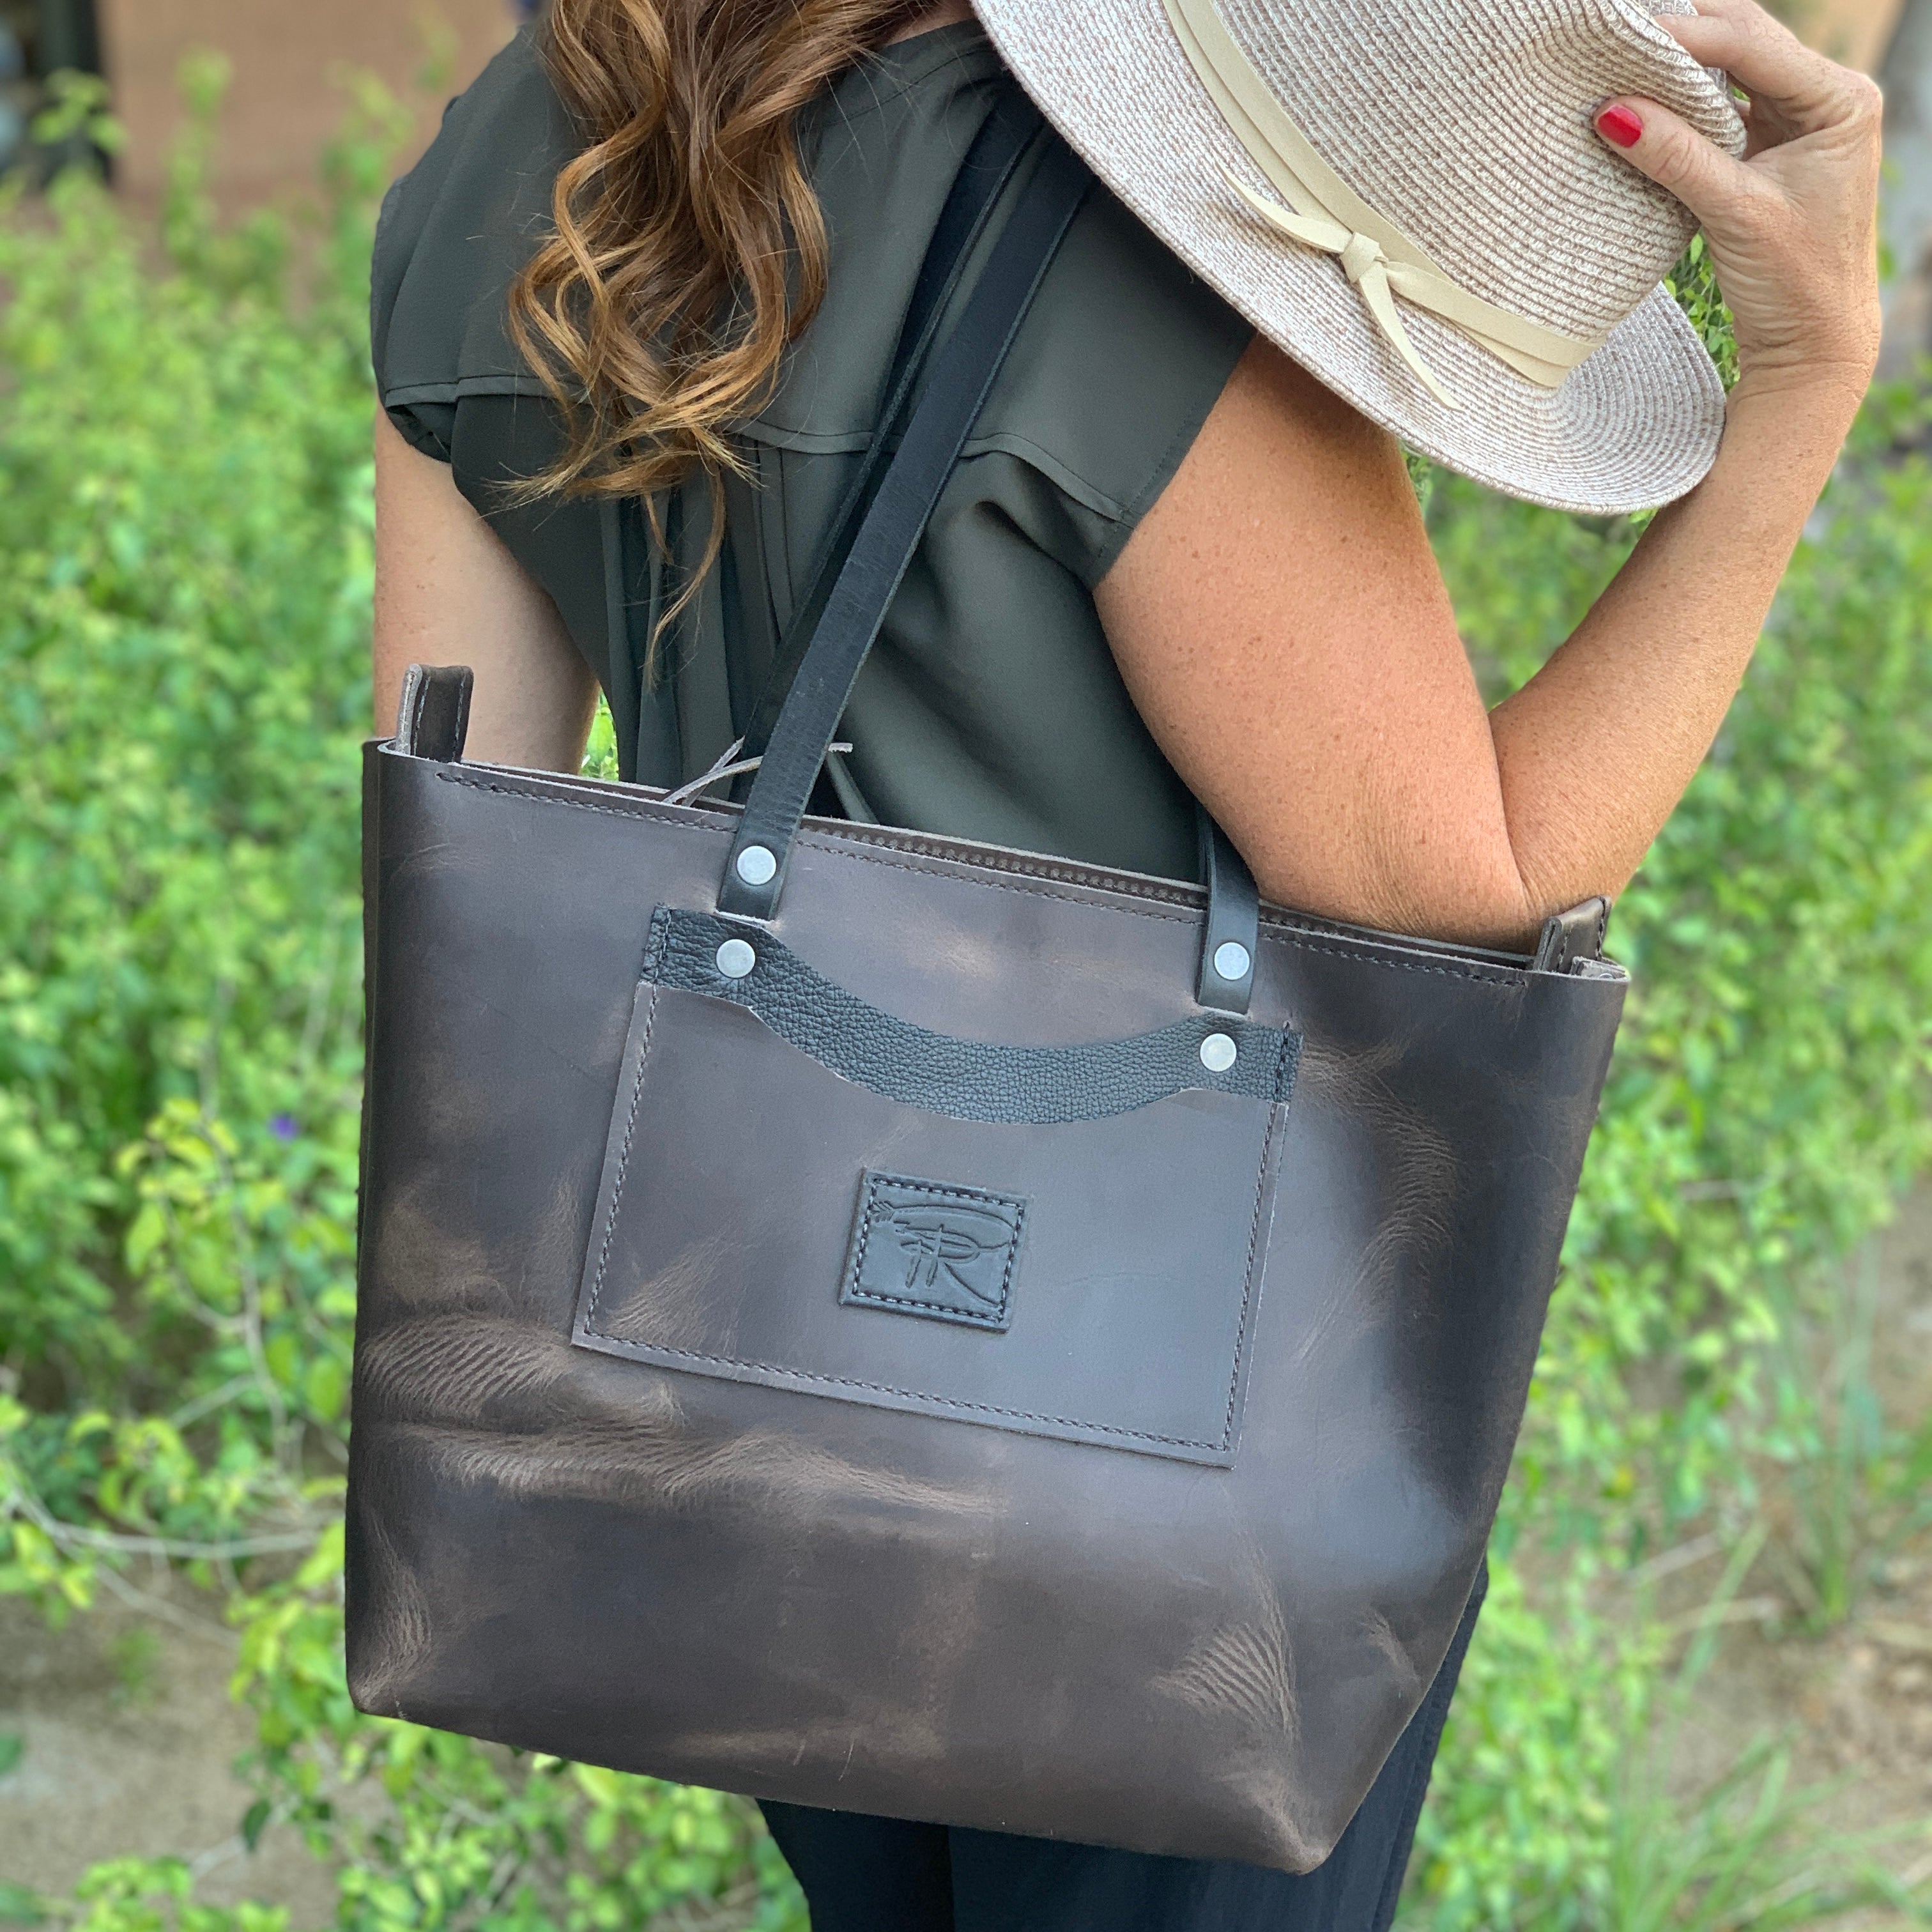 Lifetime Leather Zippered Tote Bag